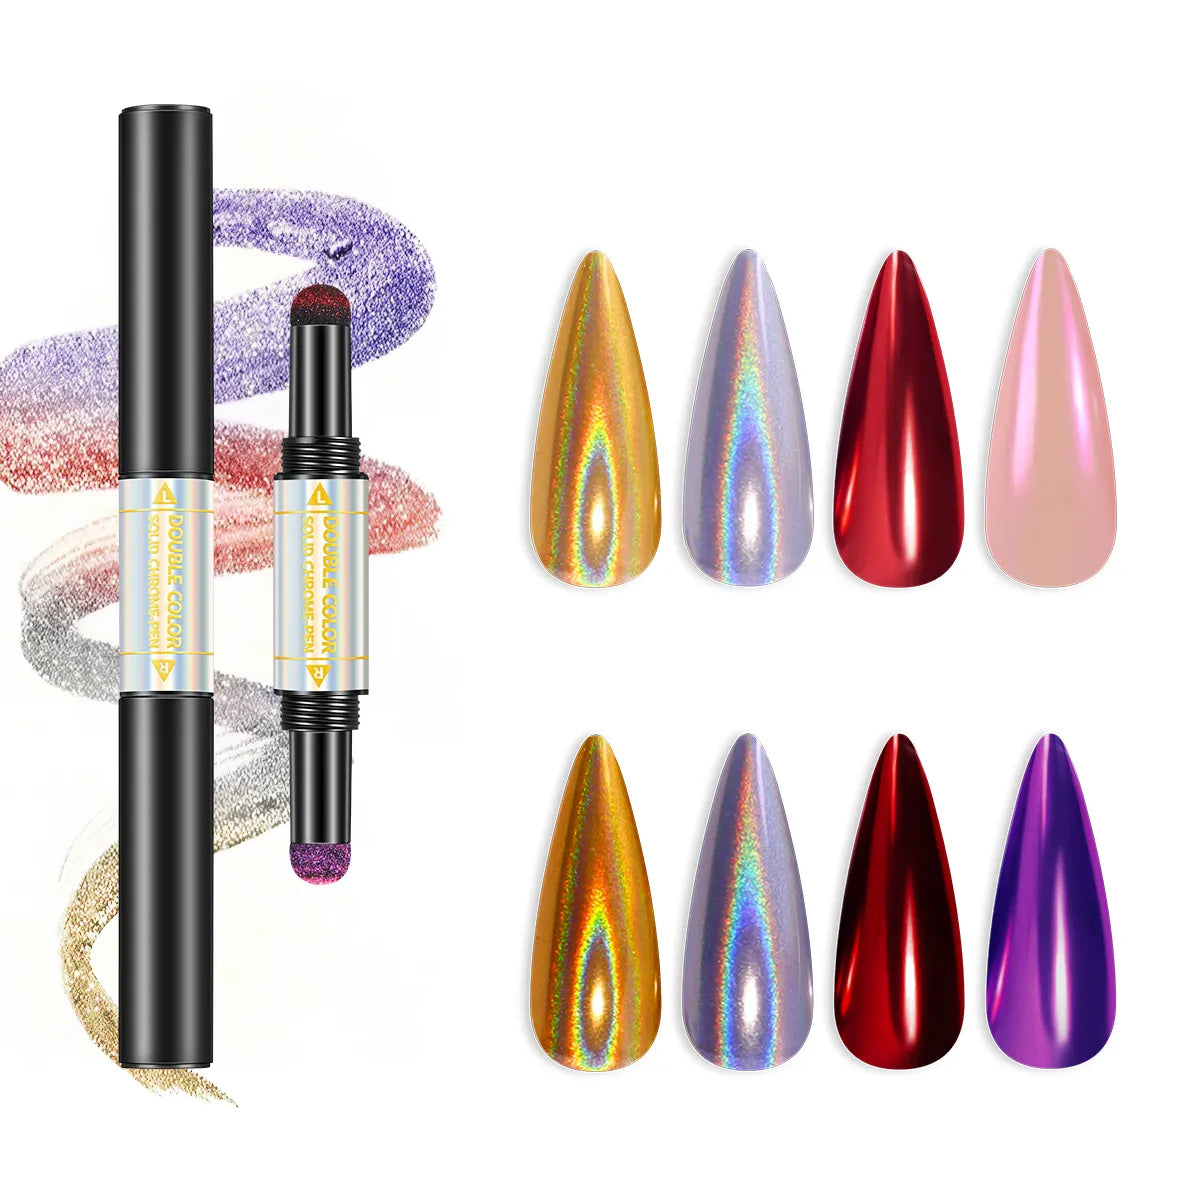 4 Colors Double-ended Nail Art Mirror Powder Pen Set With laser Rainbow Effect